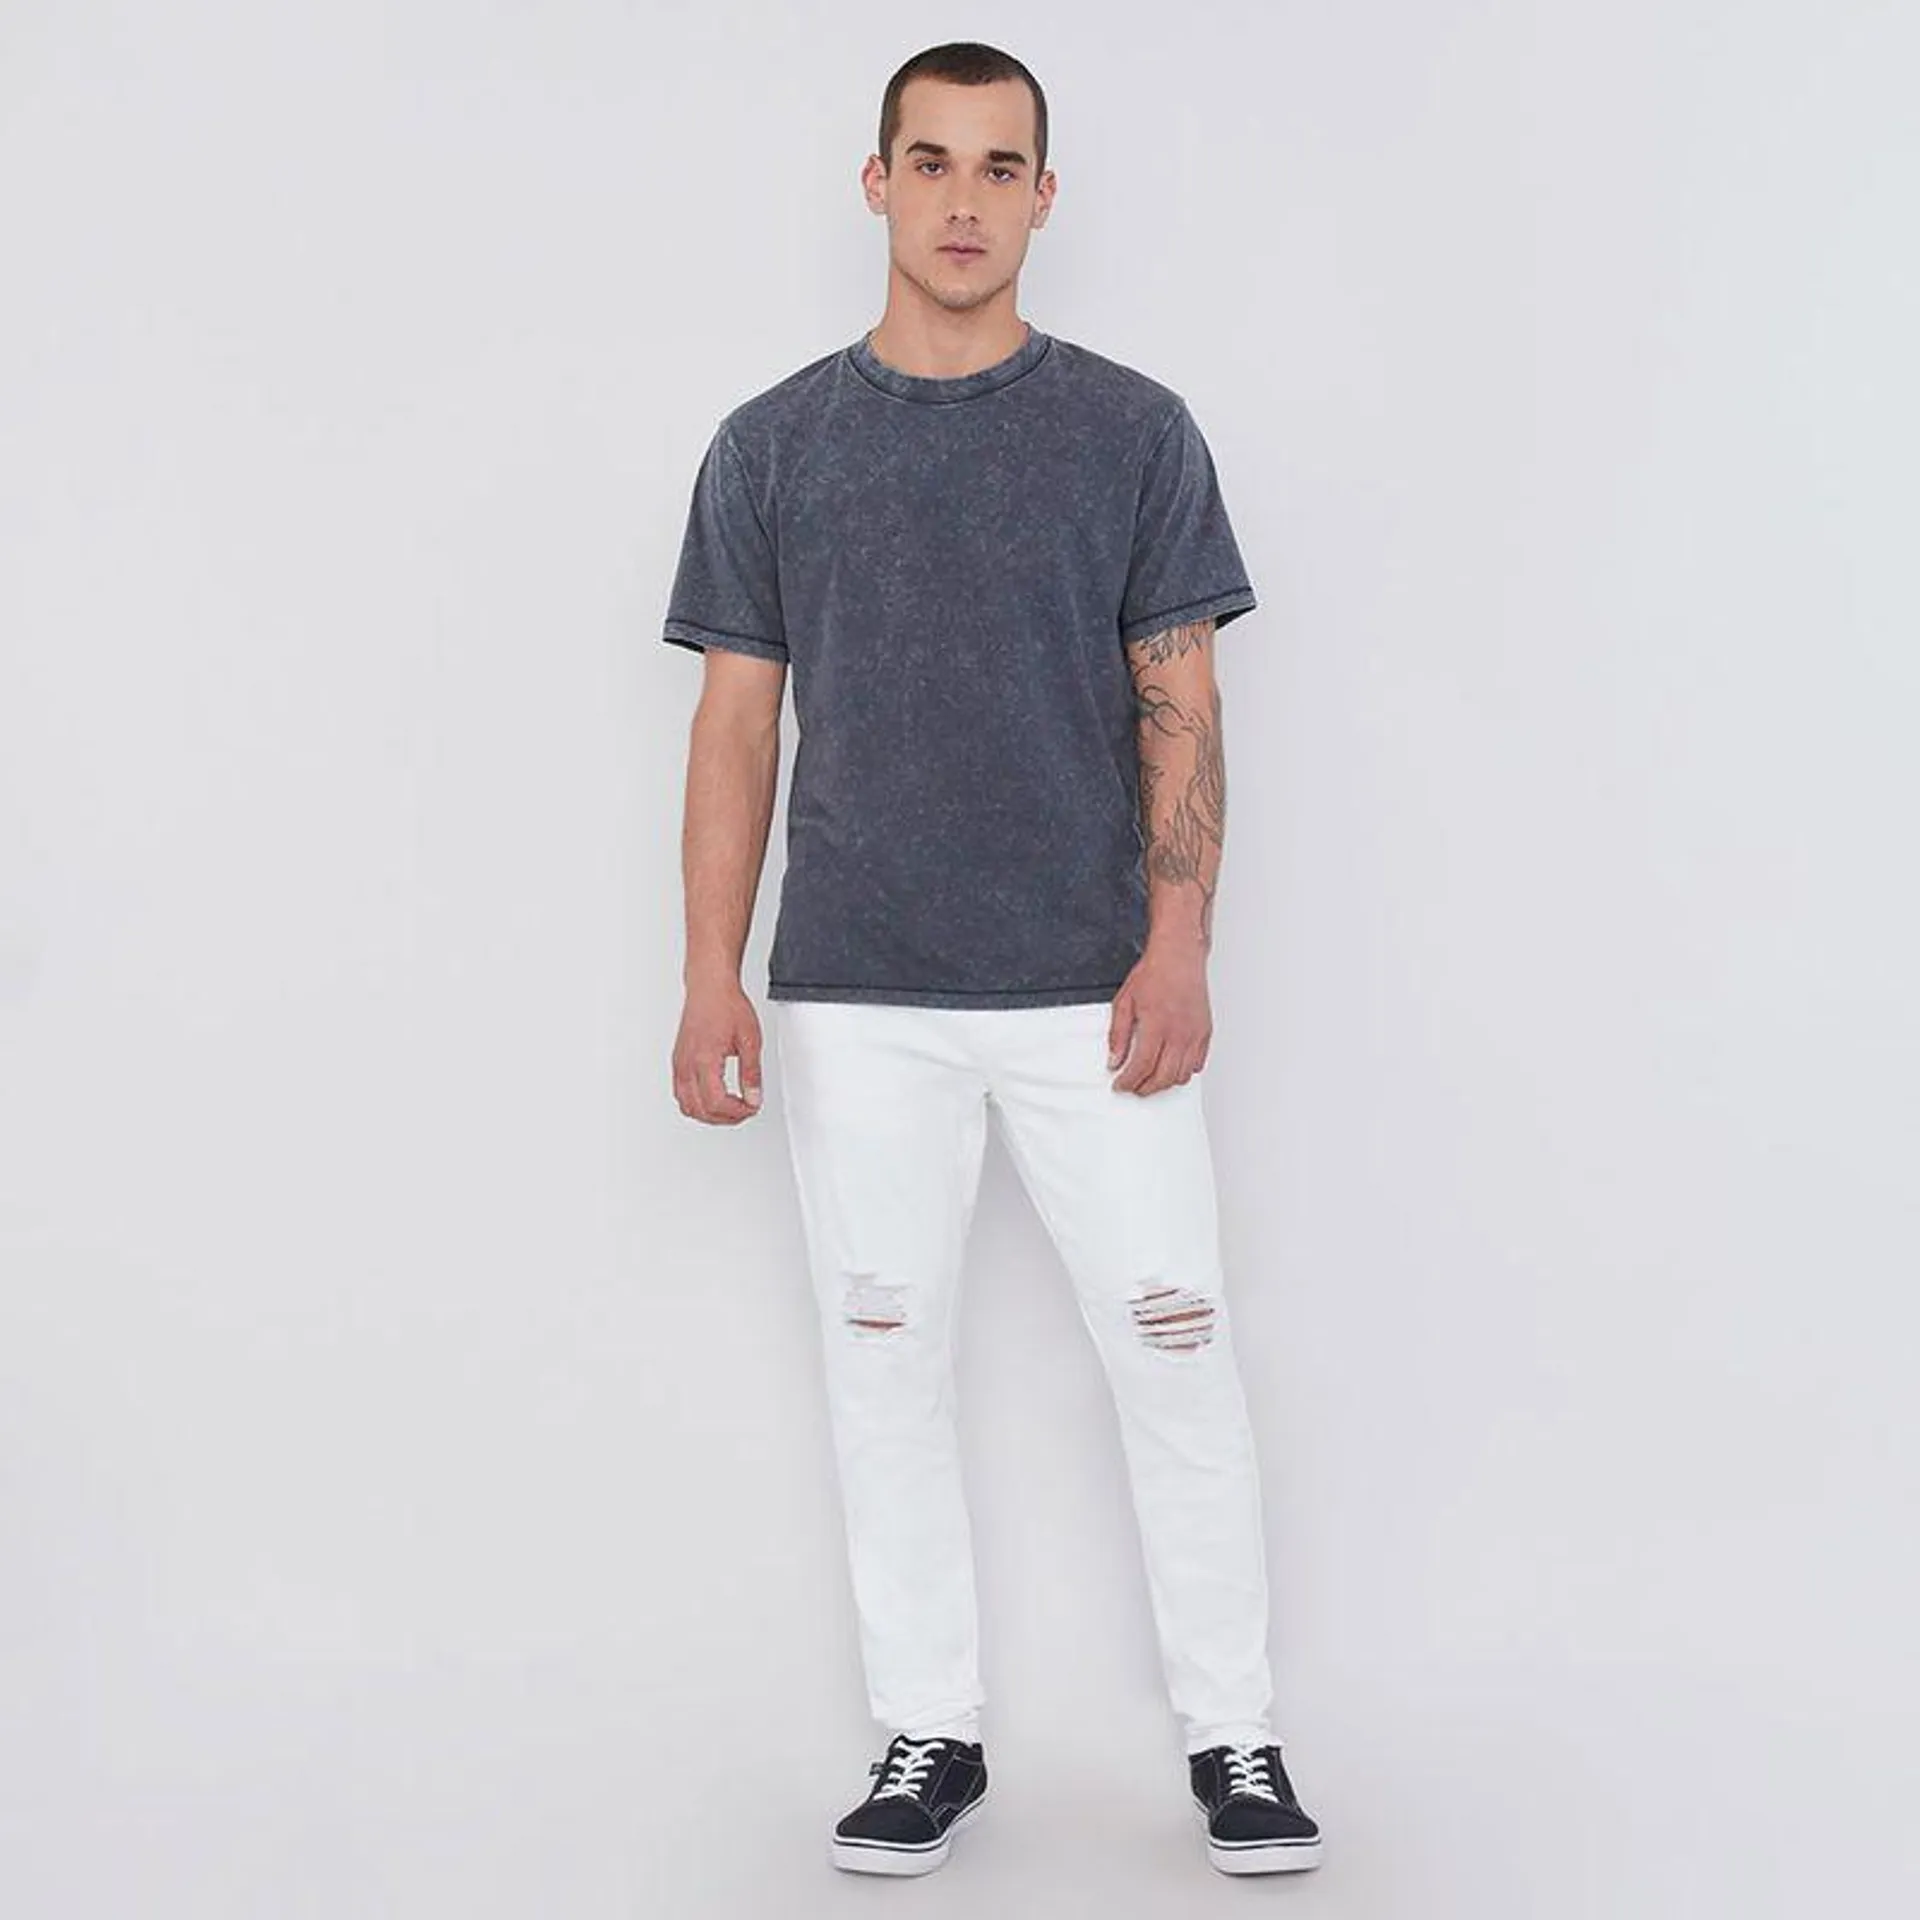 Jeans Hombre Super Skinny Fit Roturas Blanco